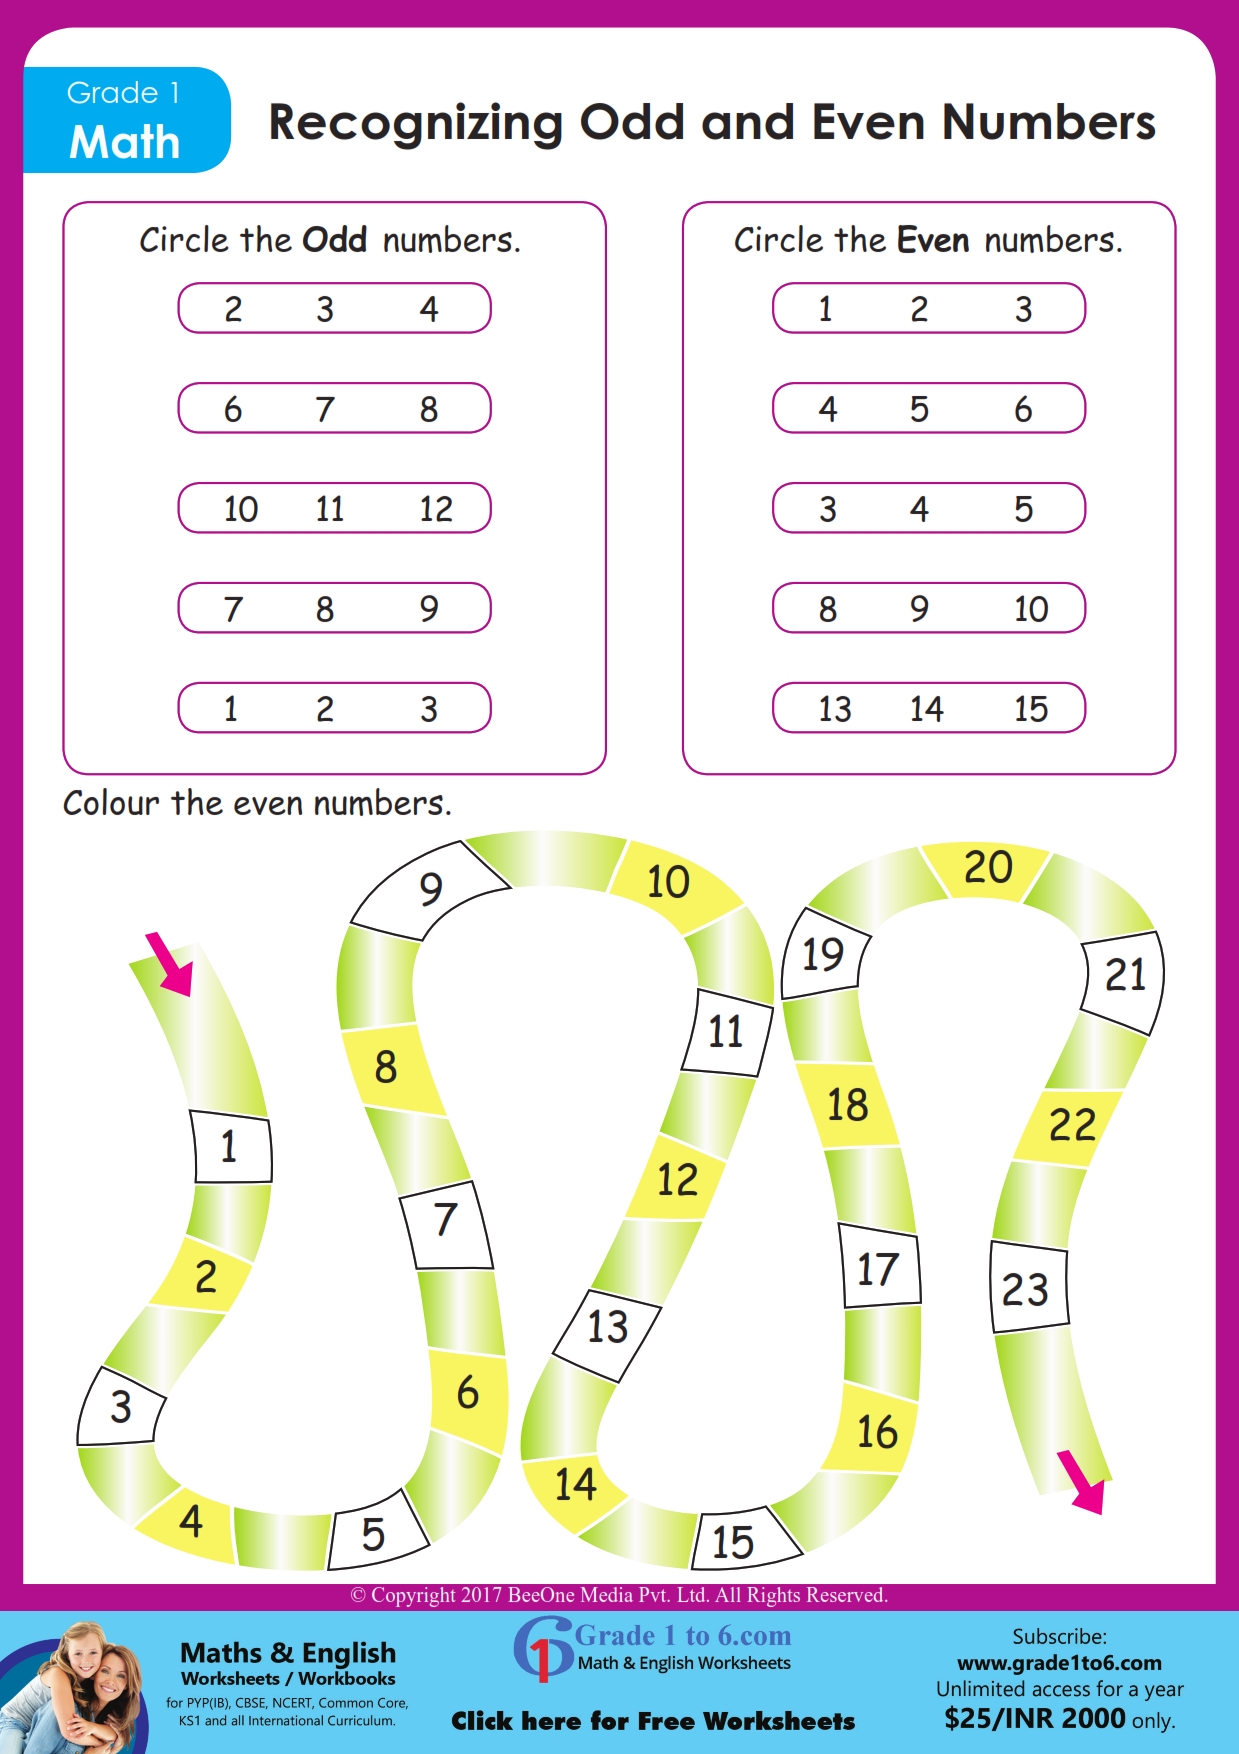 odd-and-even-numbers-worksheet-grade-1-grade1to6